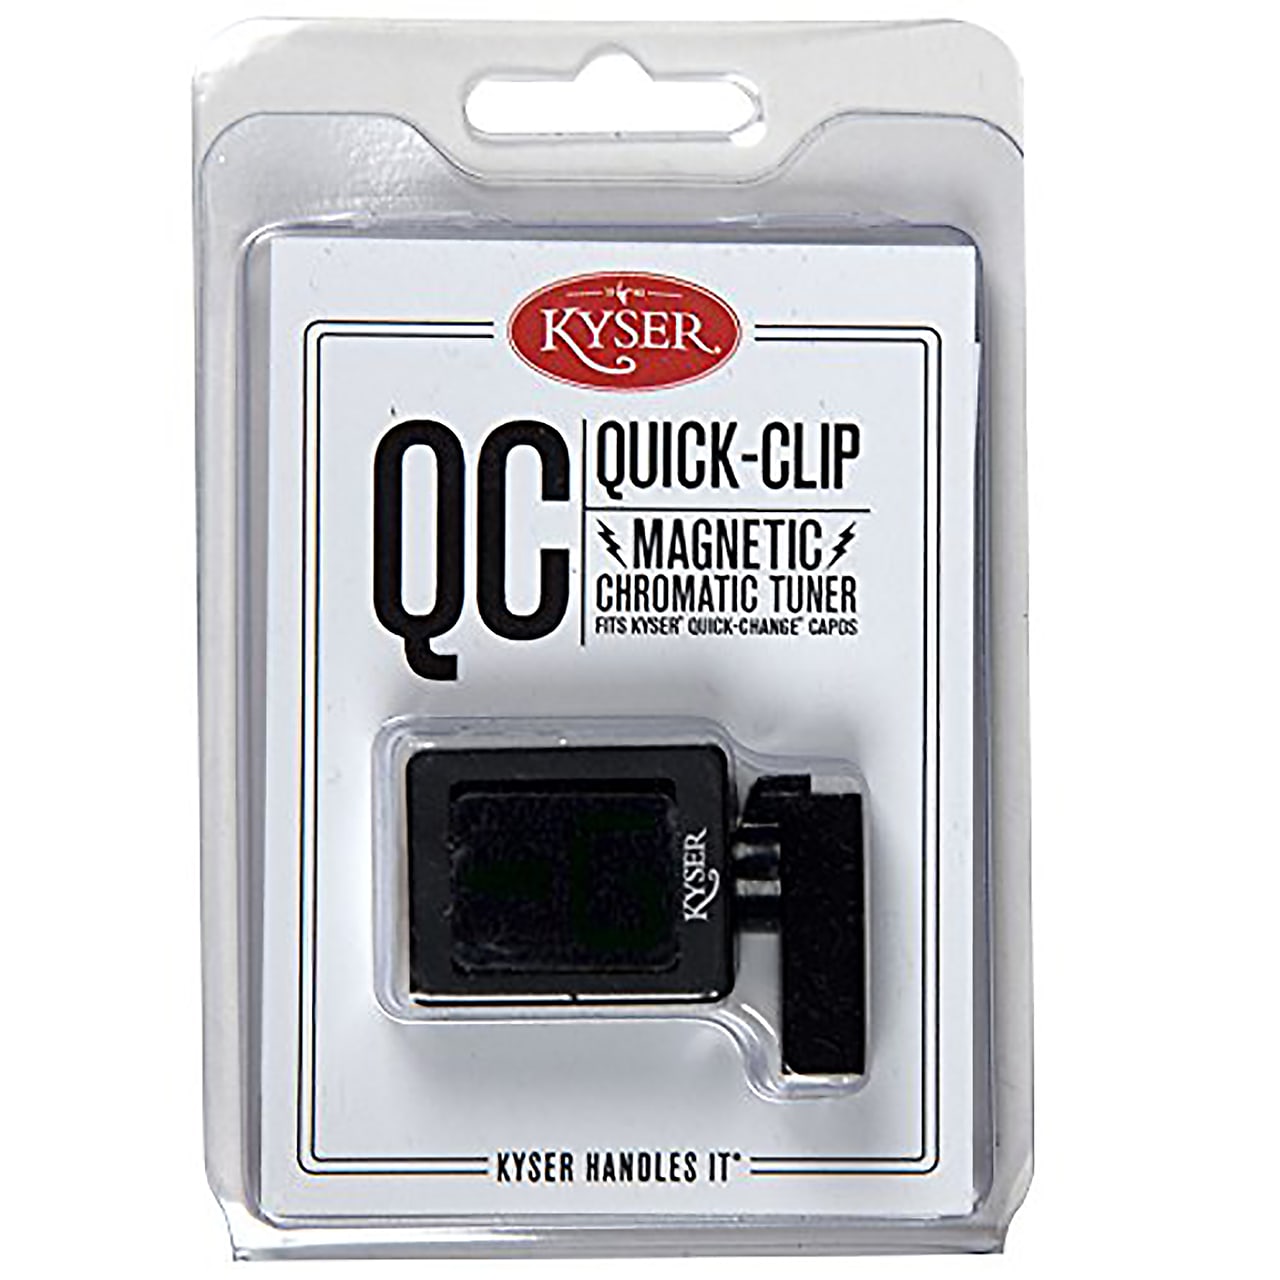 Kyser KQCT1 Quick-Clip Magnetic Chromatic Tuner